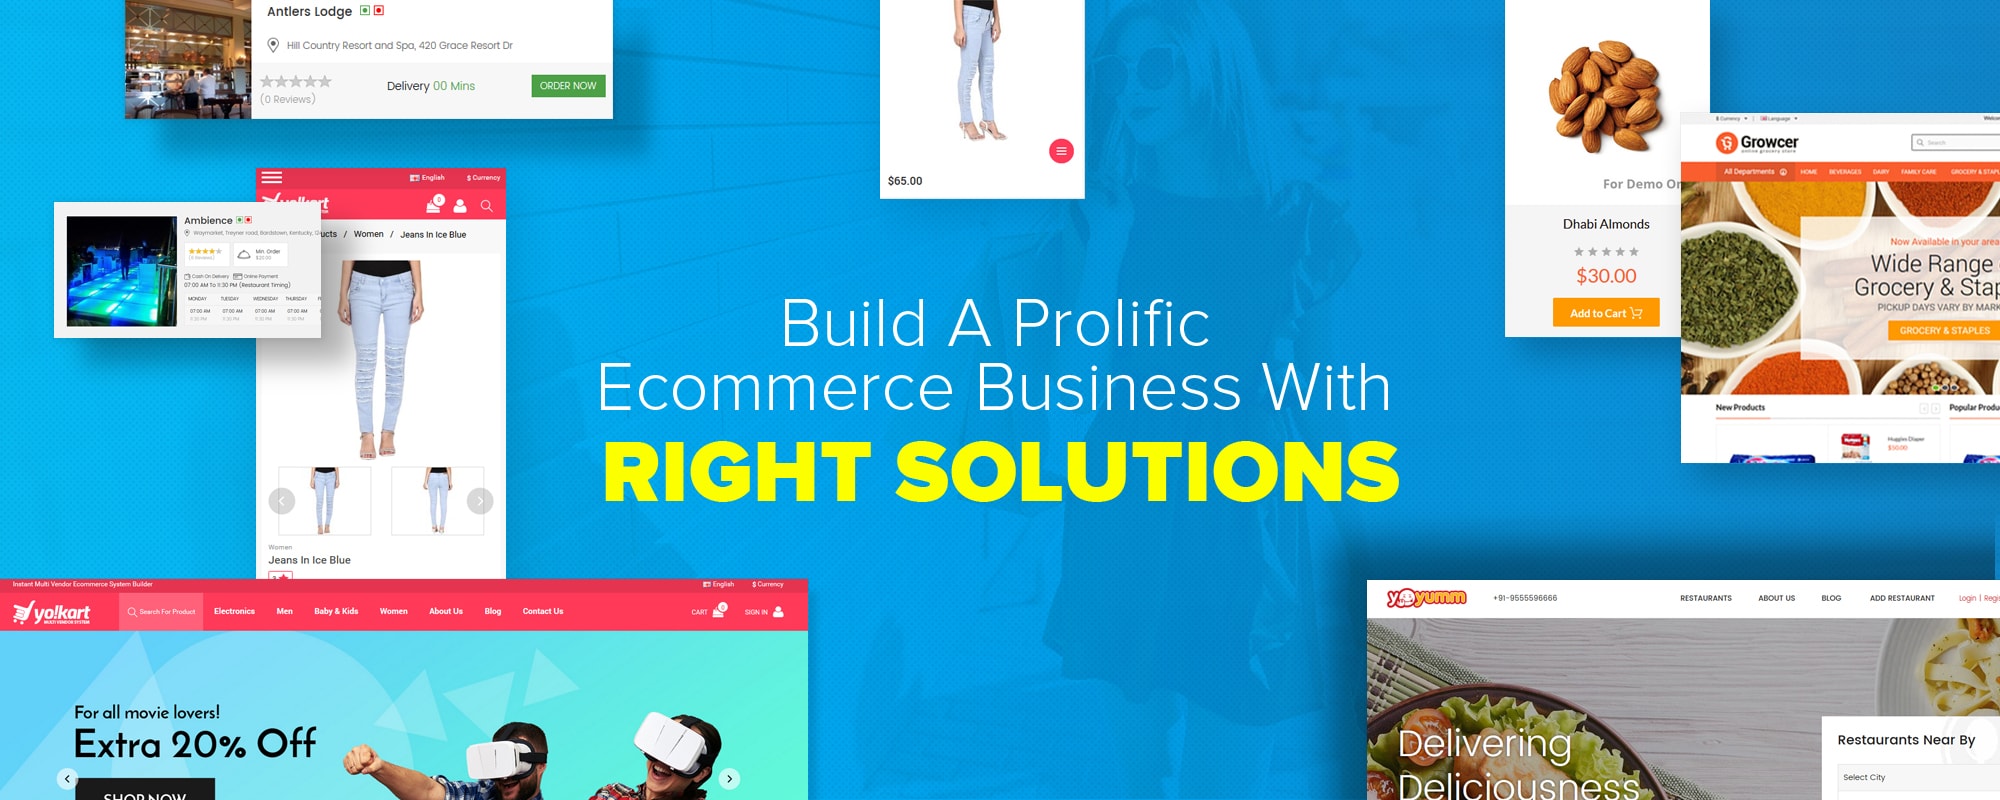 Build Your Own Online Store with FATbit’s Affordable eCommerce Marketplace Platforms